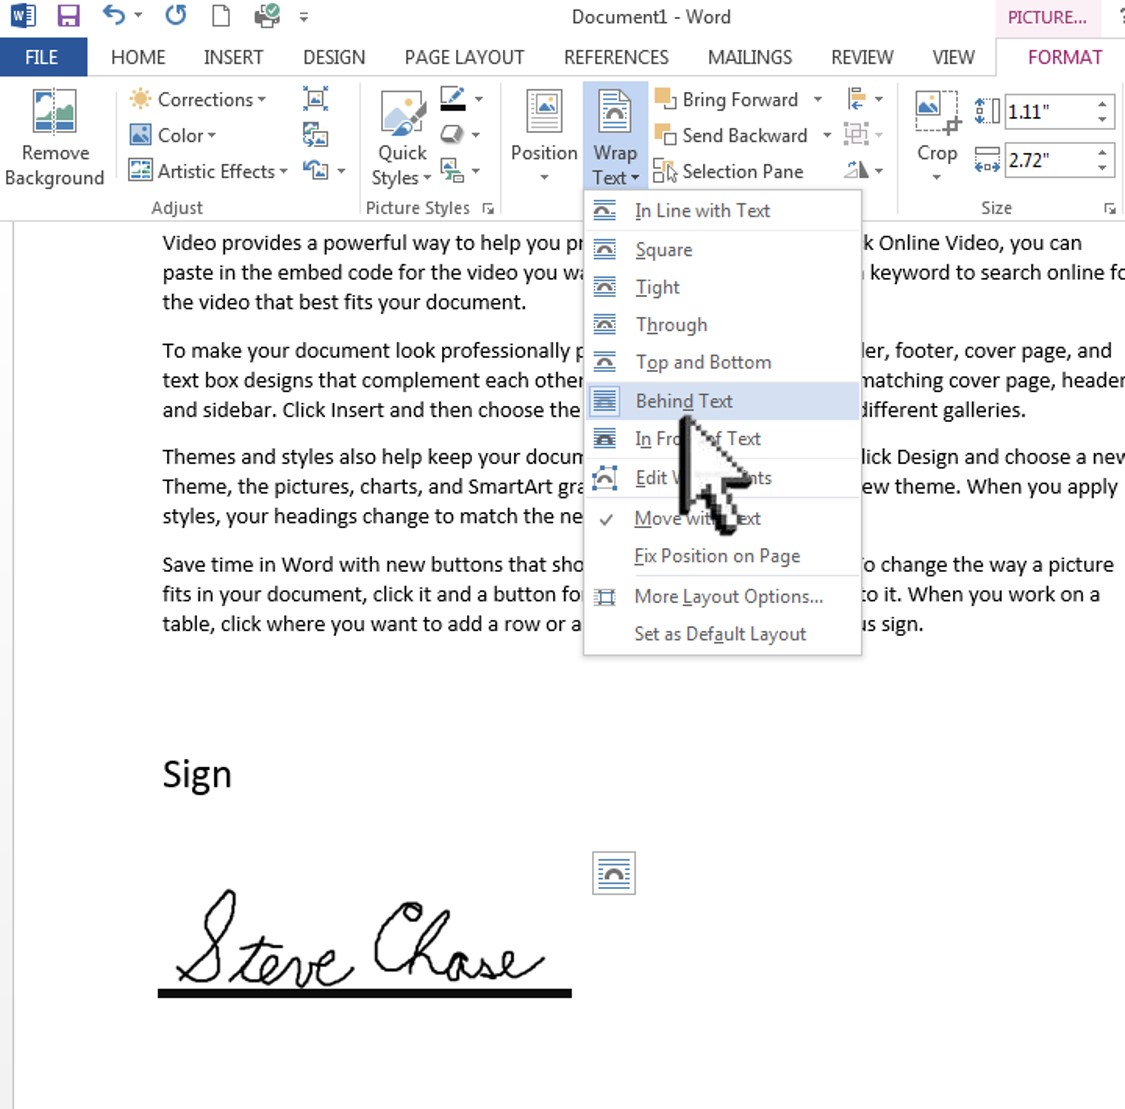 Sign a Word document with your signature  Steve Chase Docs